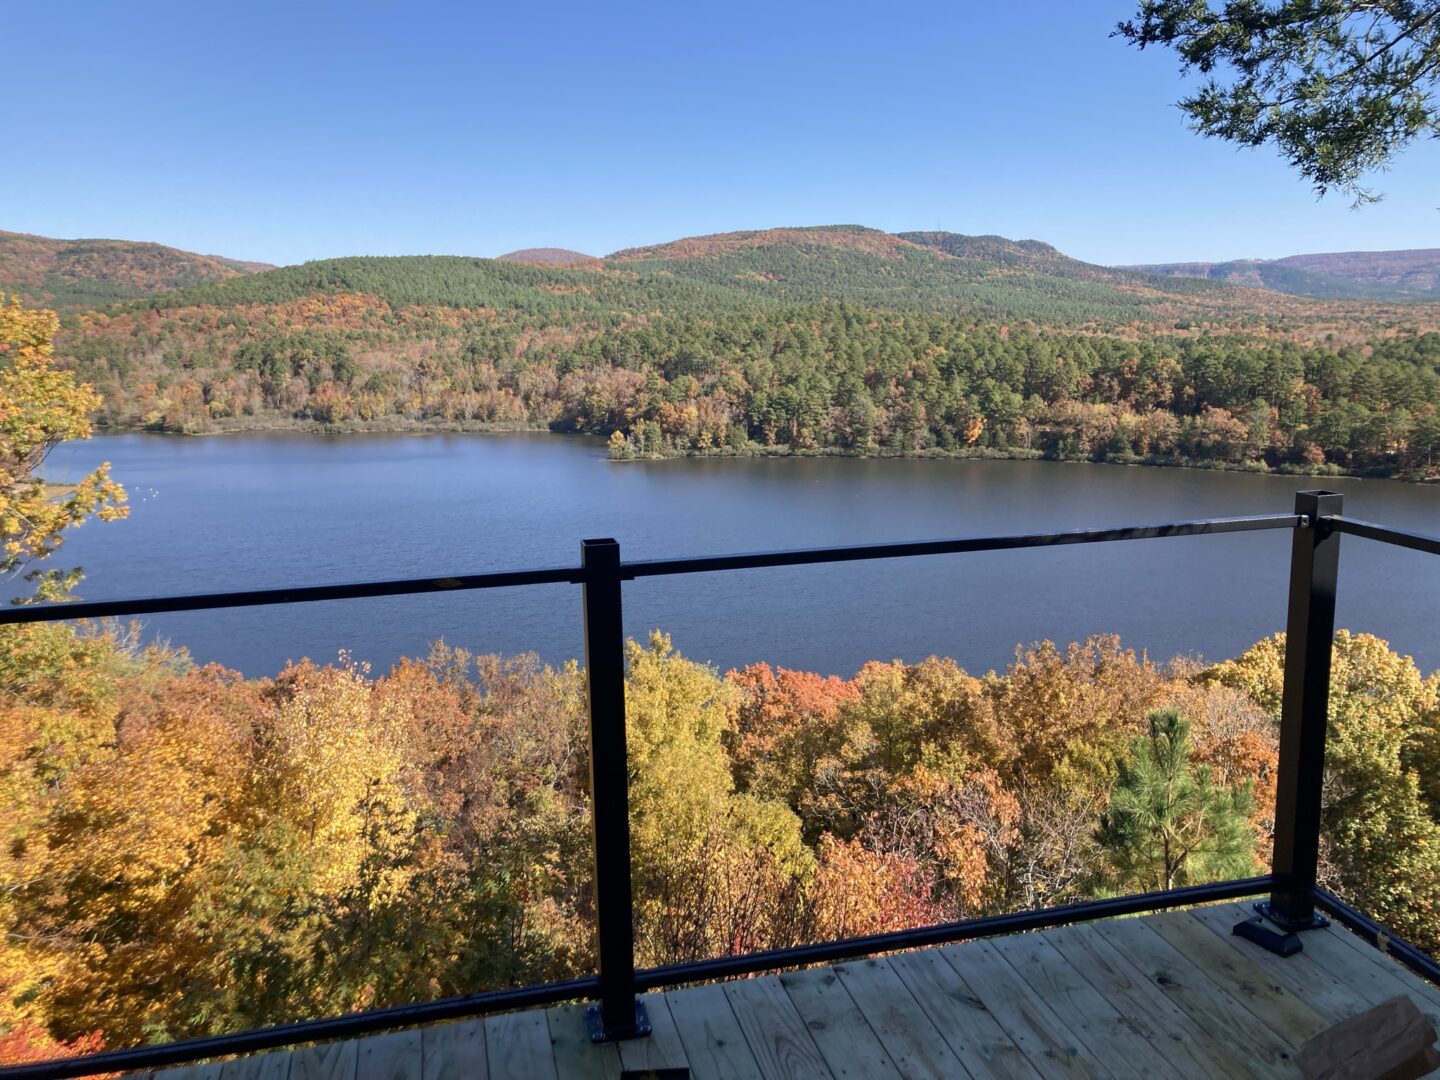 A view of the lake from a deck in autumn.